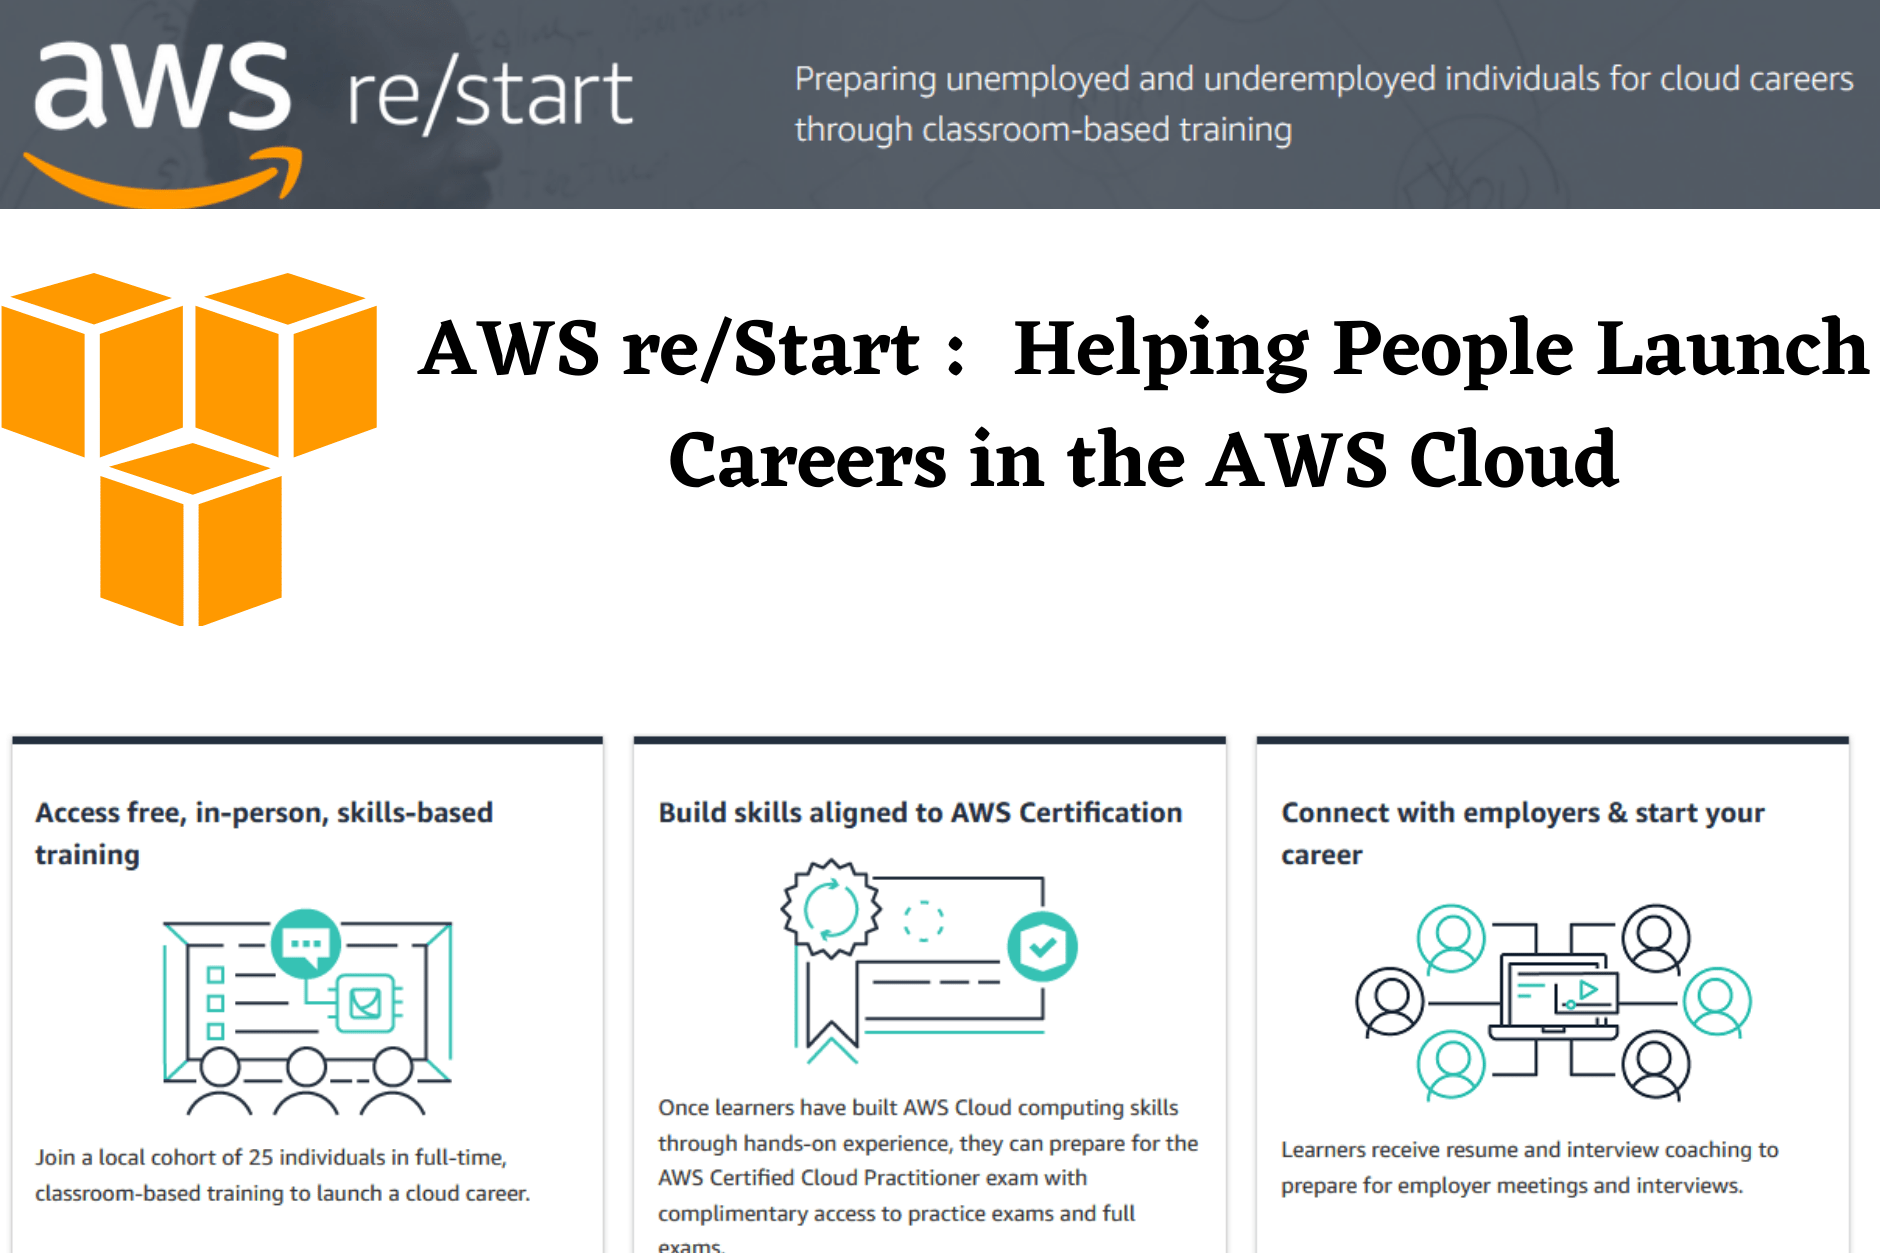 Helping People Launch Careers in the AWS Cloud